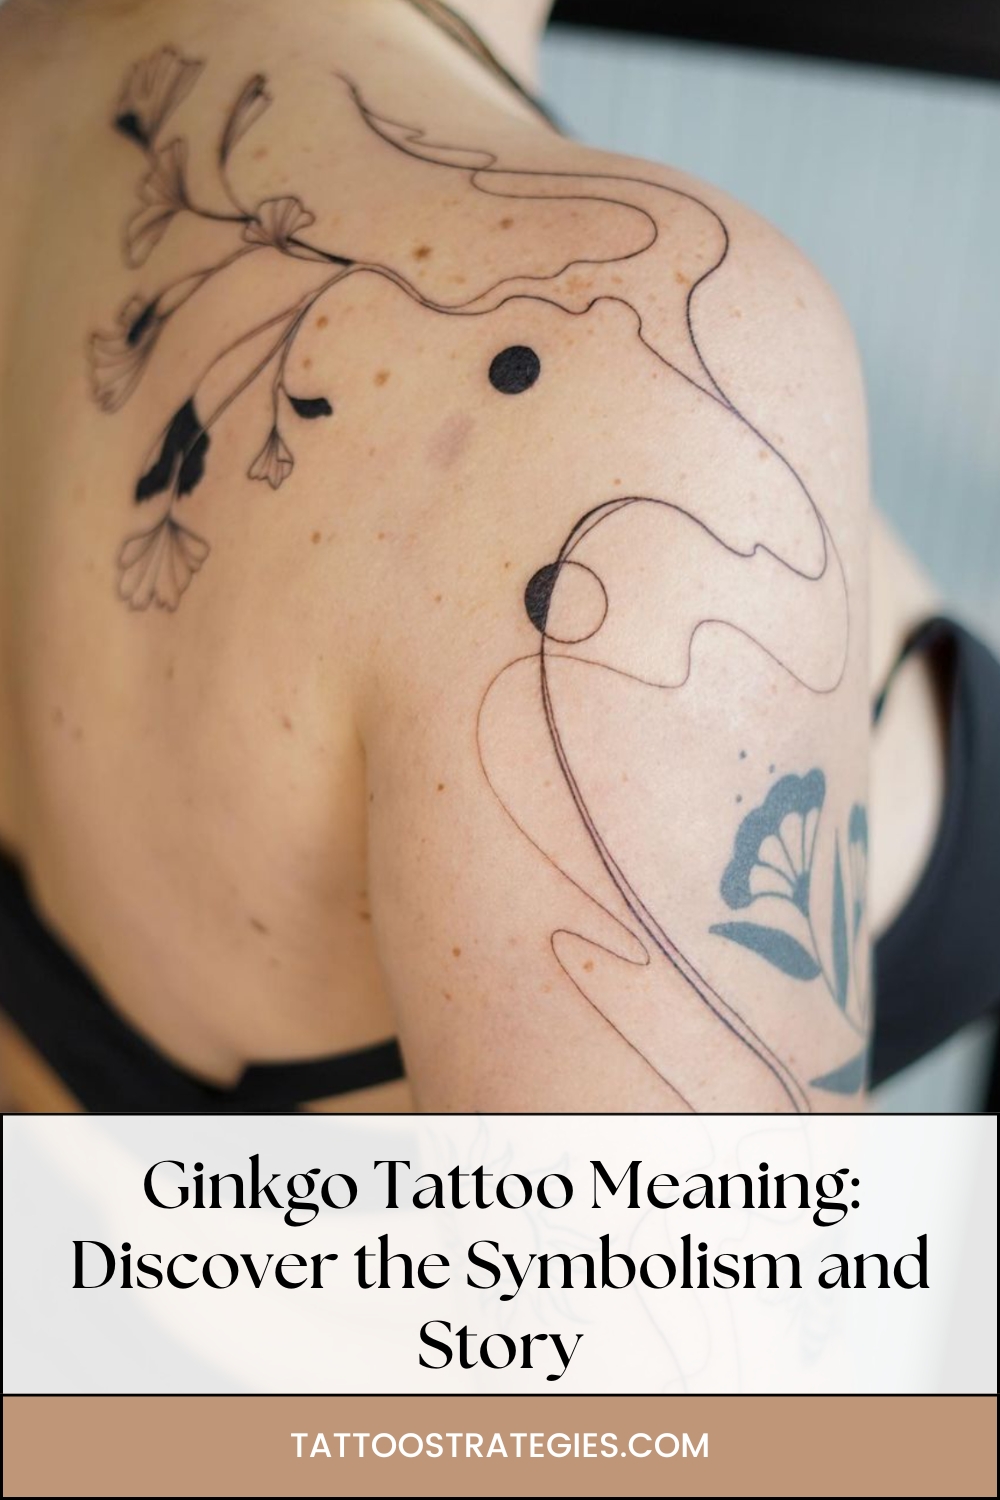 Ginkgo Tattoo Meaning Discover the Symbolism and Story - Tattoo Strategies